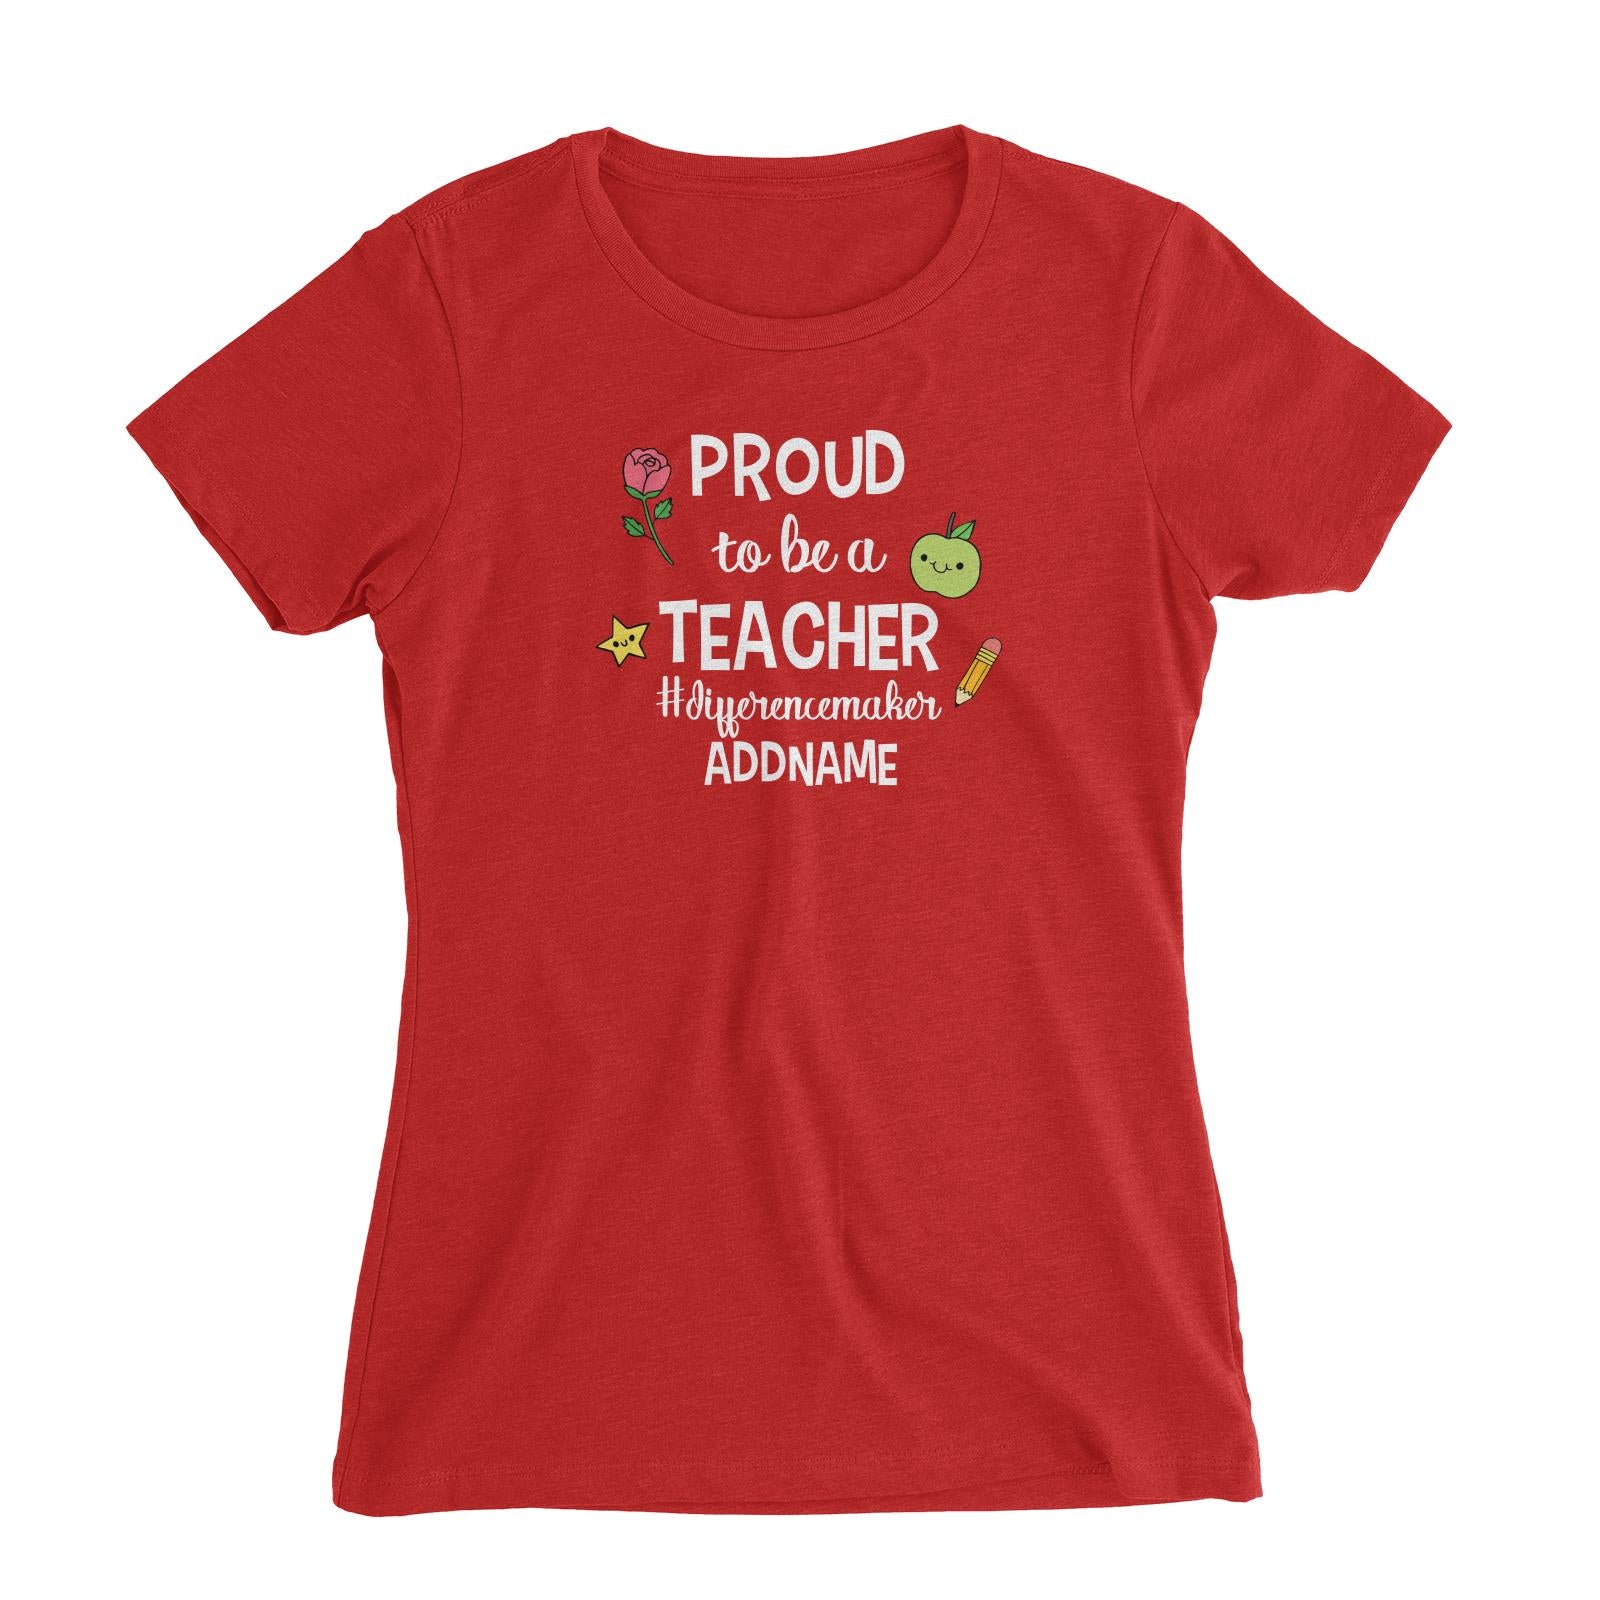 Doodle Series - Proud To Be A Teacher #differencemaker Women's Slim Fit T-Shirt